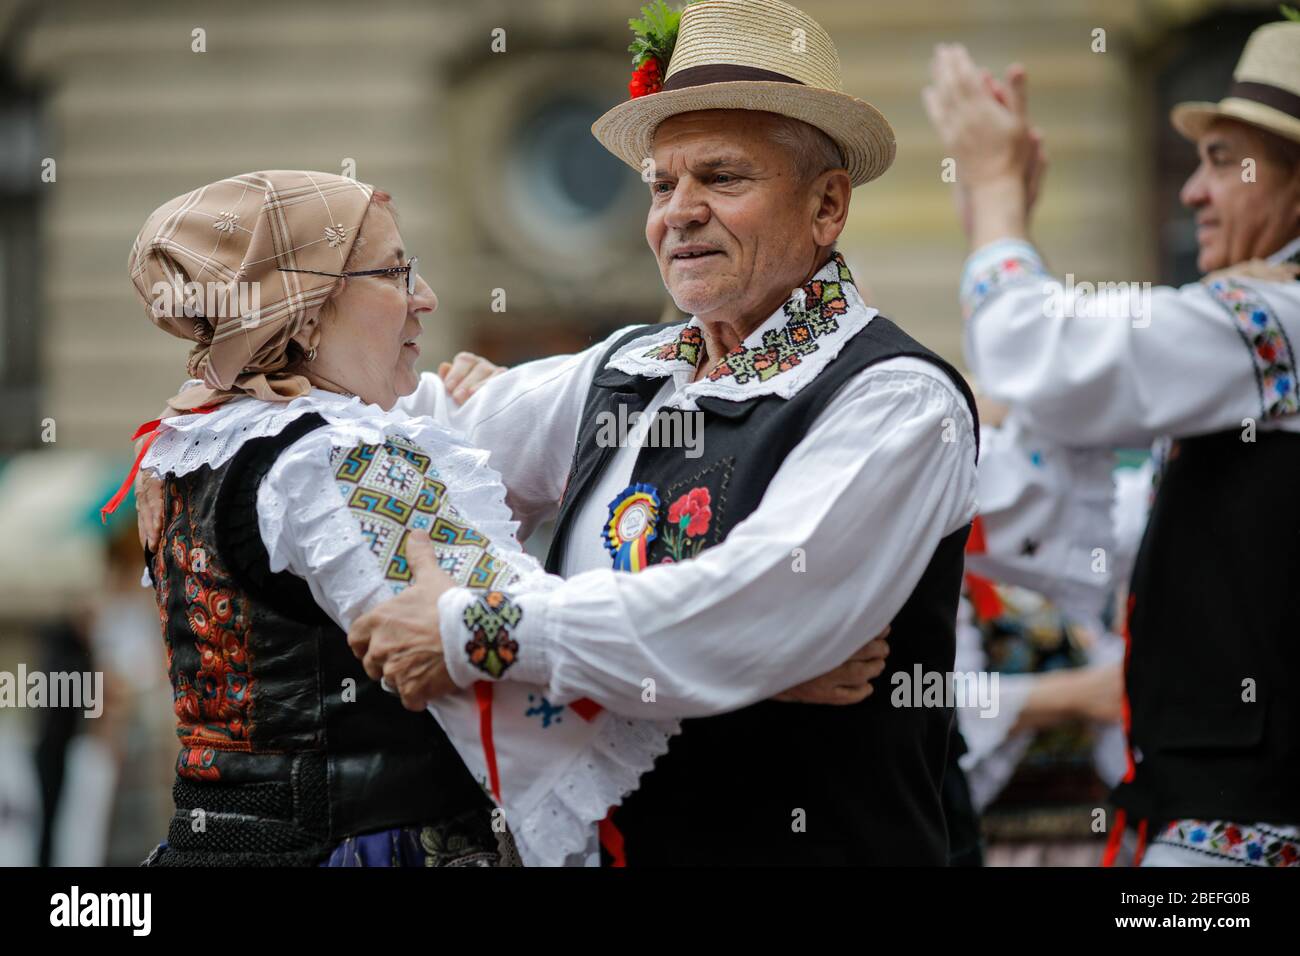 Bucharest, Romania - March 5, 2020: Senior women and men, dressed in Romanian traditional clothing, dance at a festival. Stock Photo